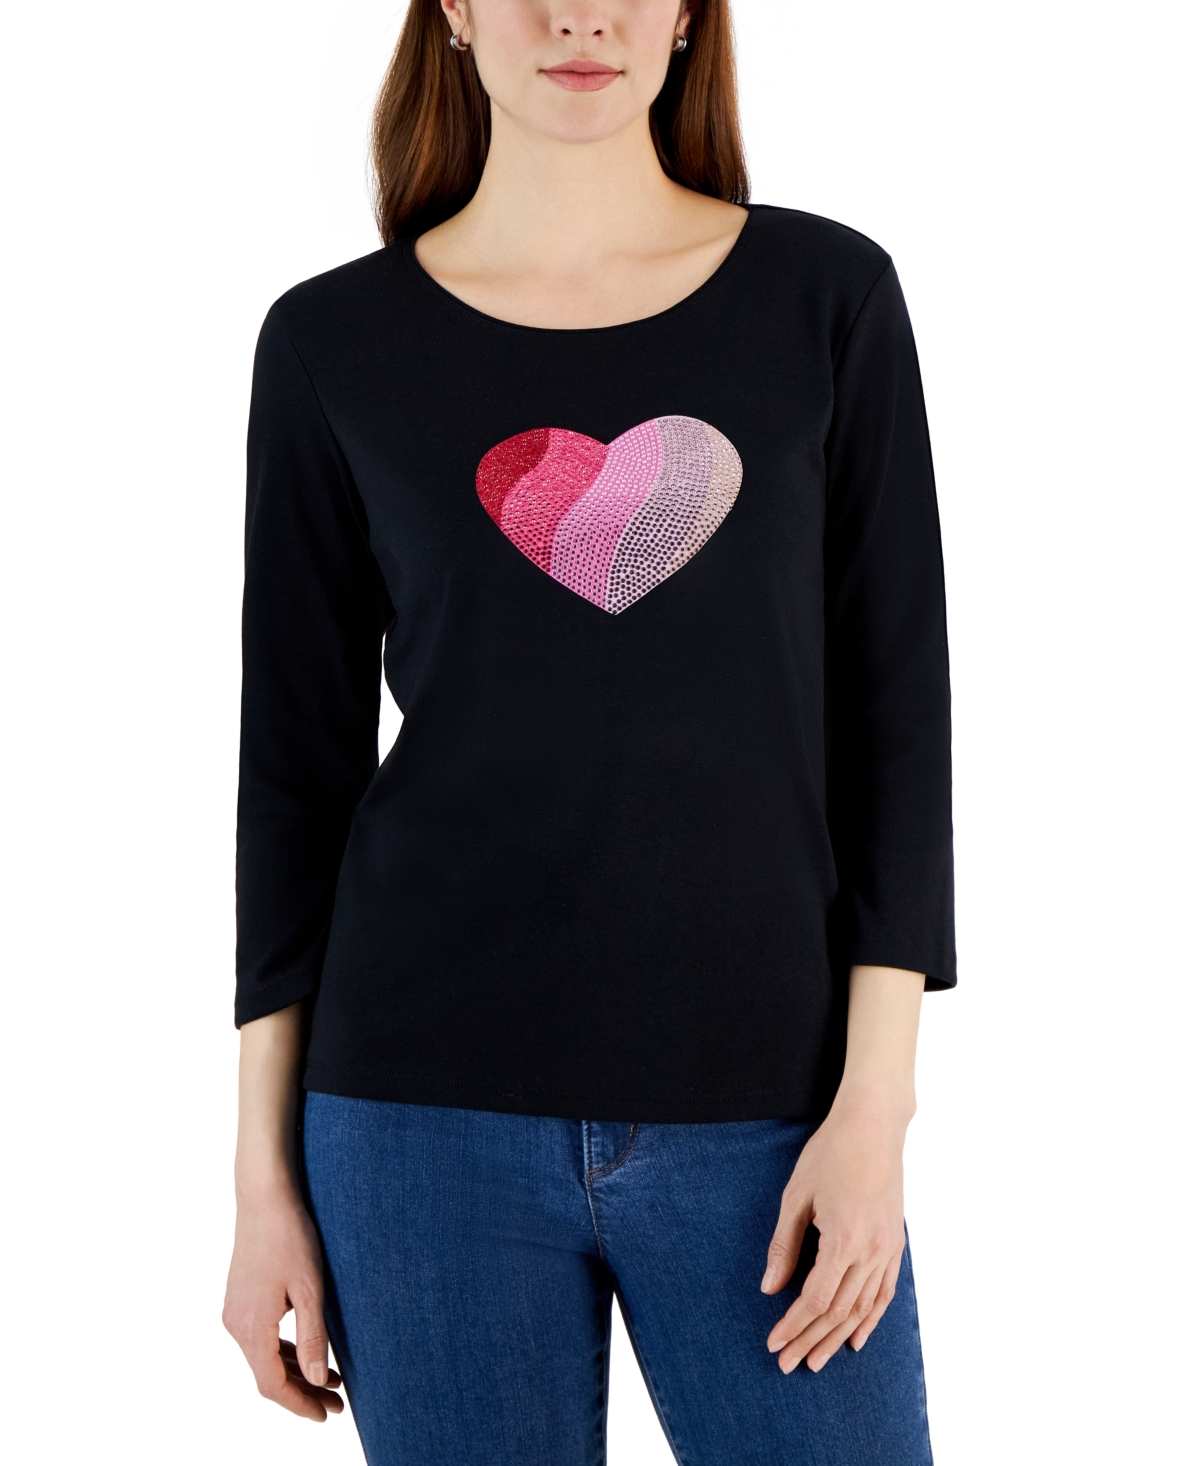 Women's Gem Heart Graphic Pullover Top, Created for Macy's - New Red Amore